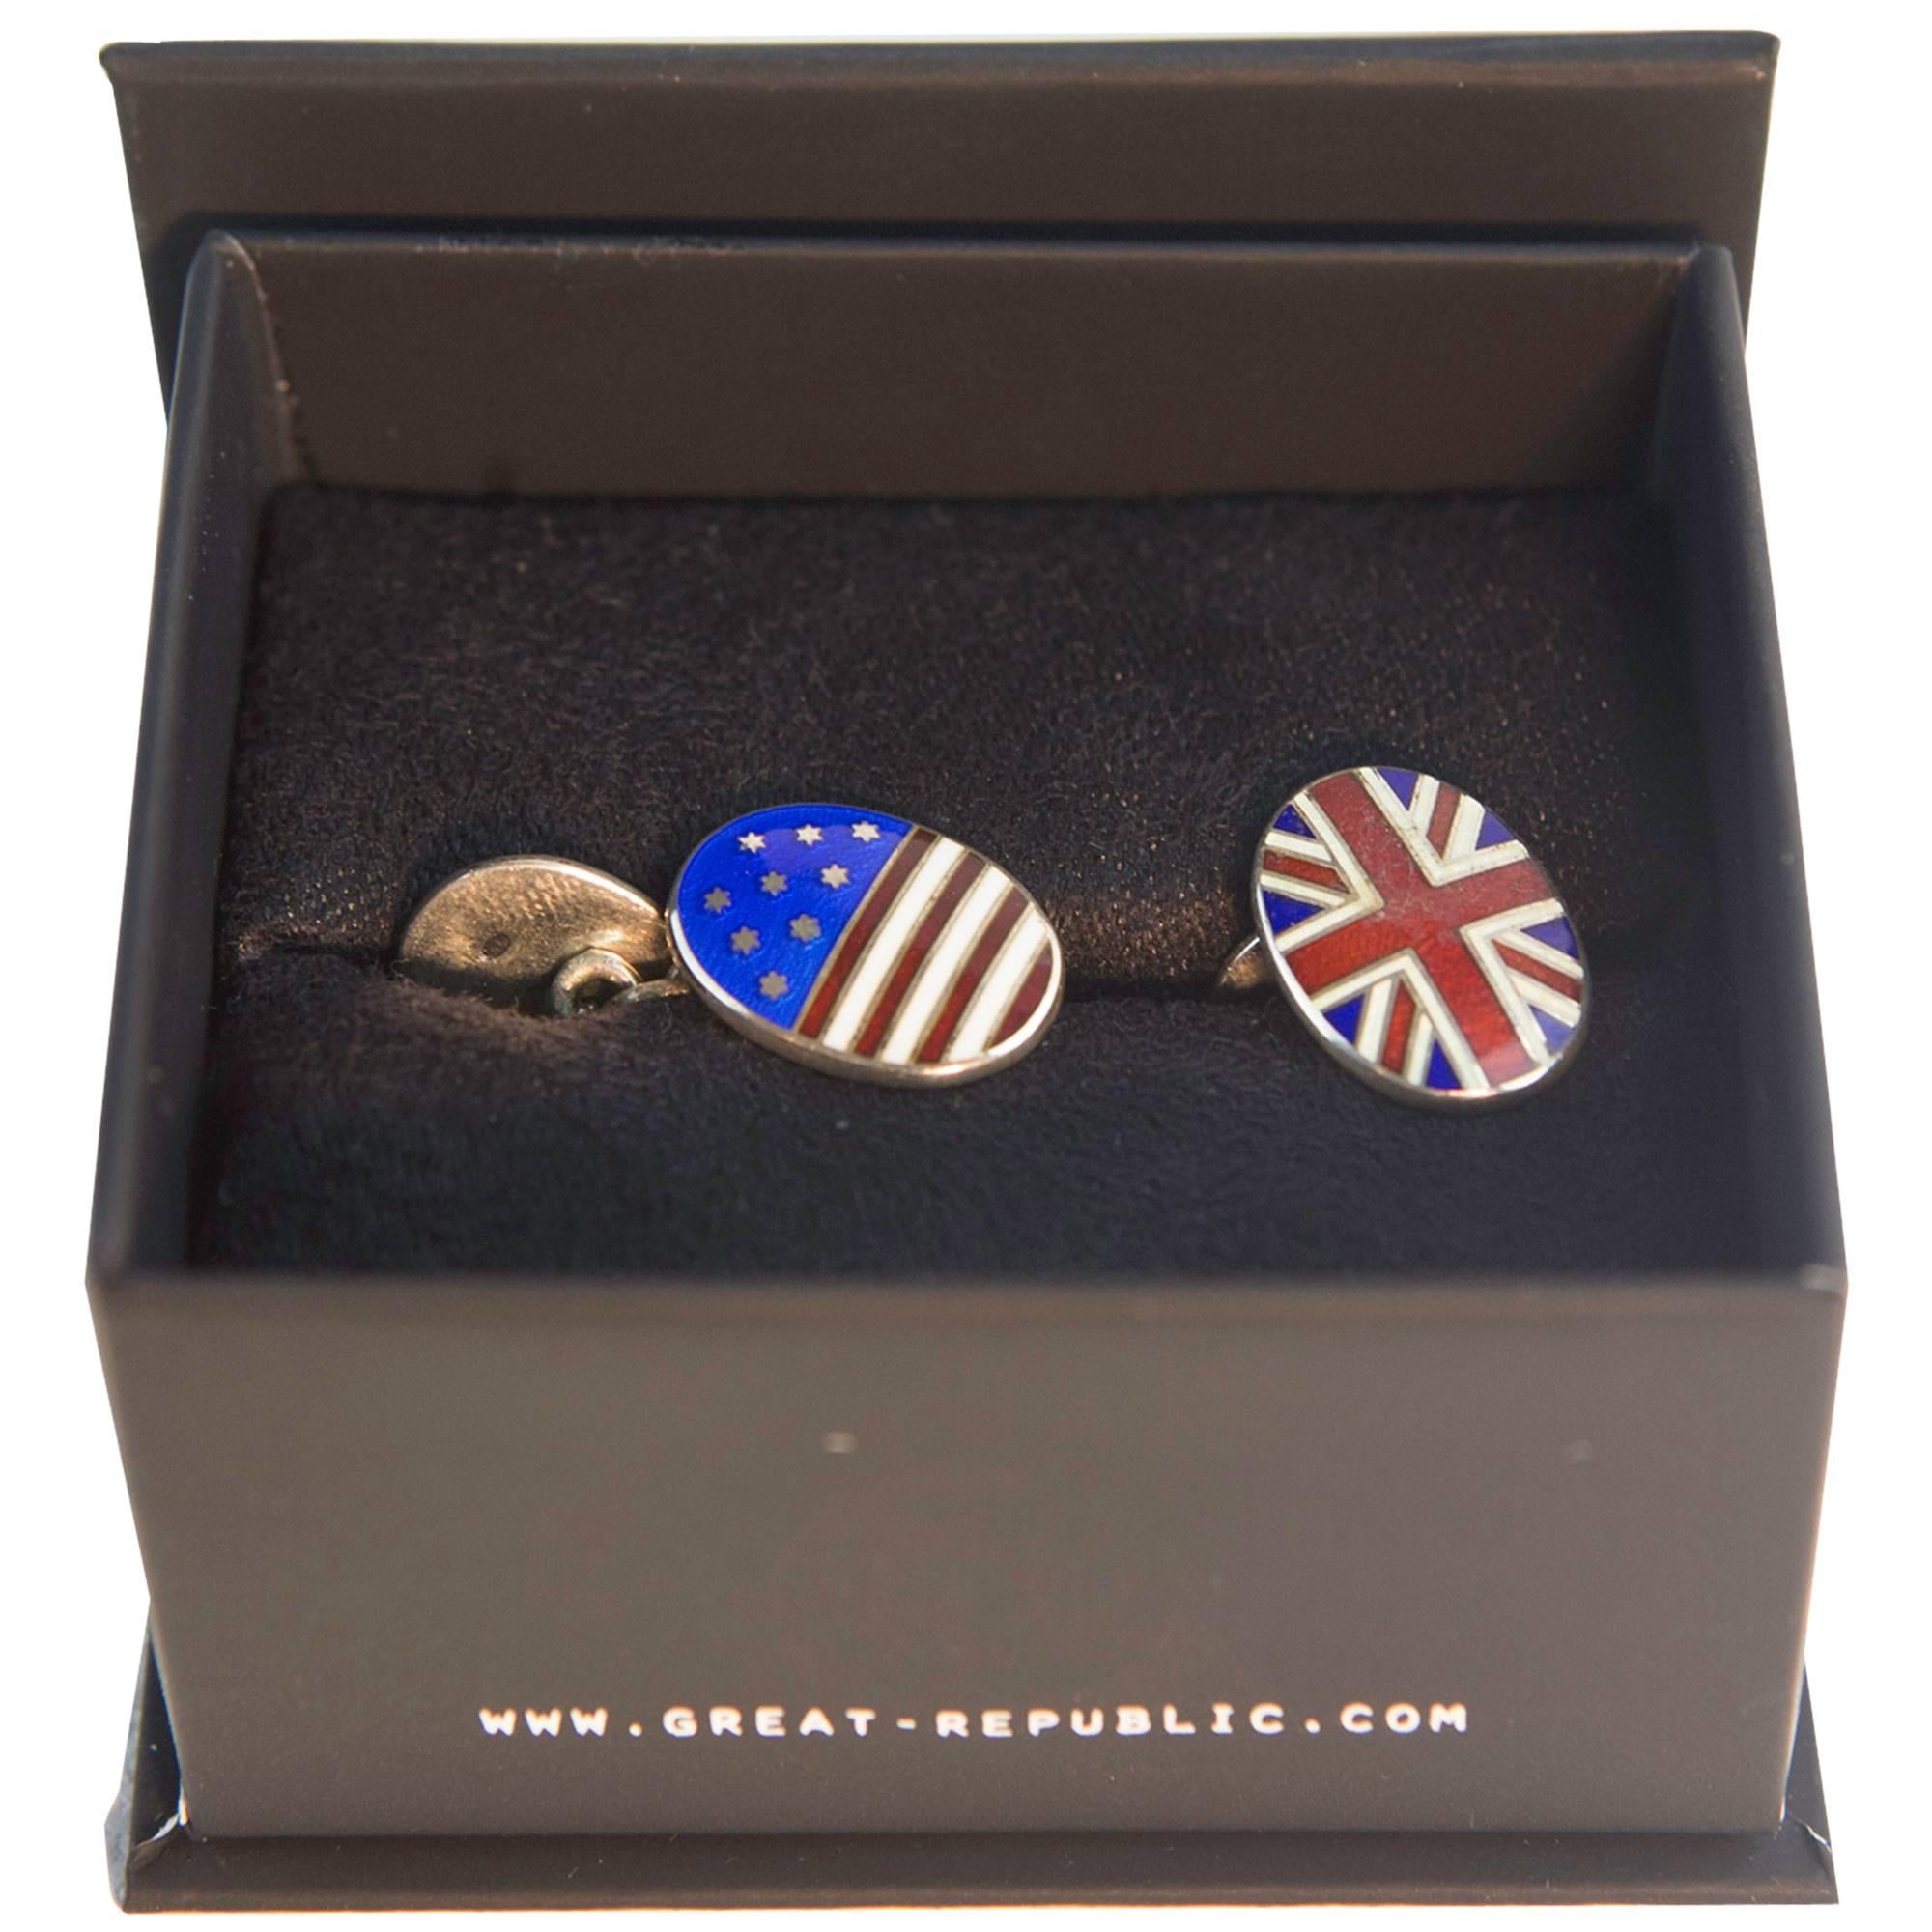 Speaker of the House, Tom Foley's Personal US/British Flag Cuff Links